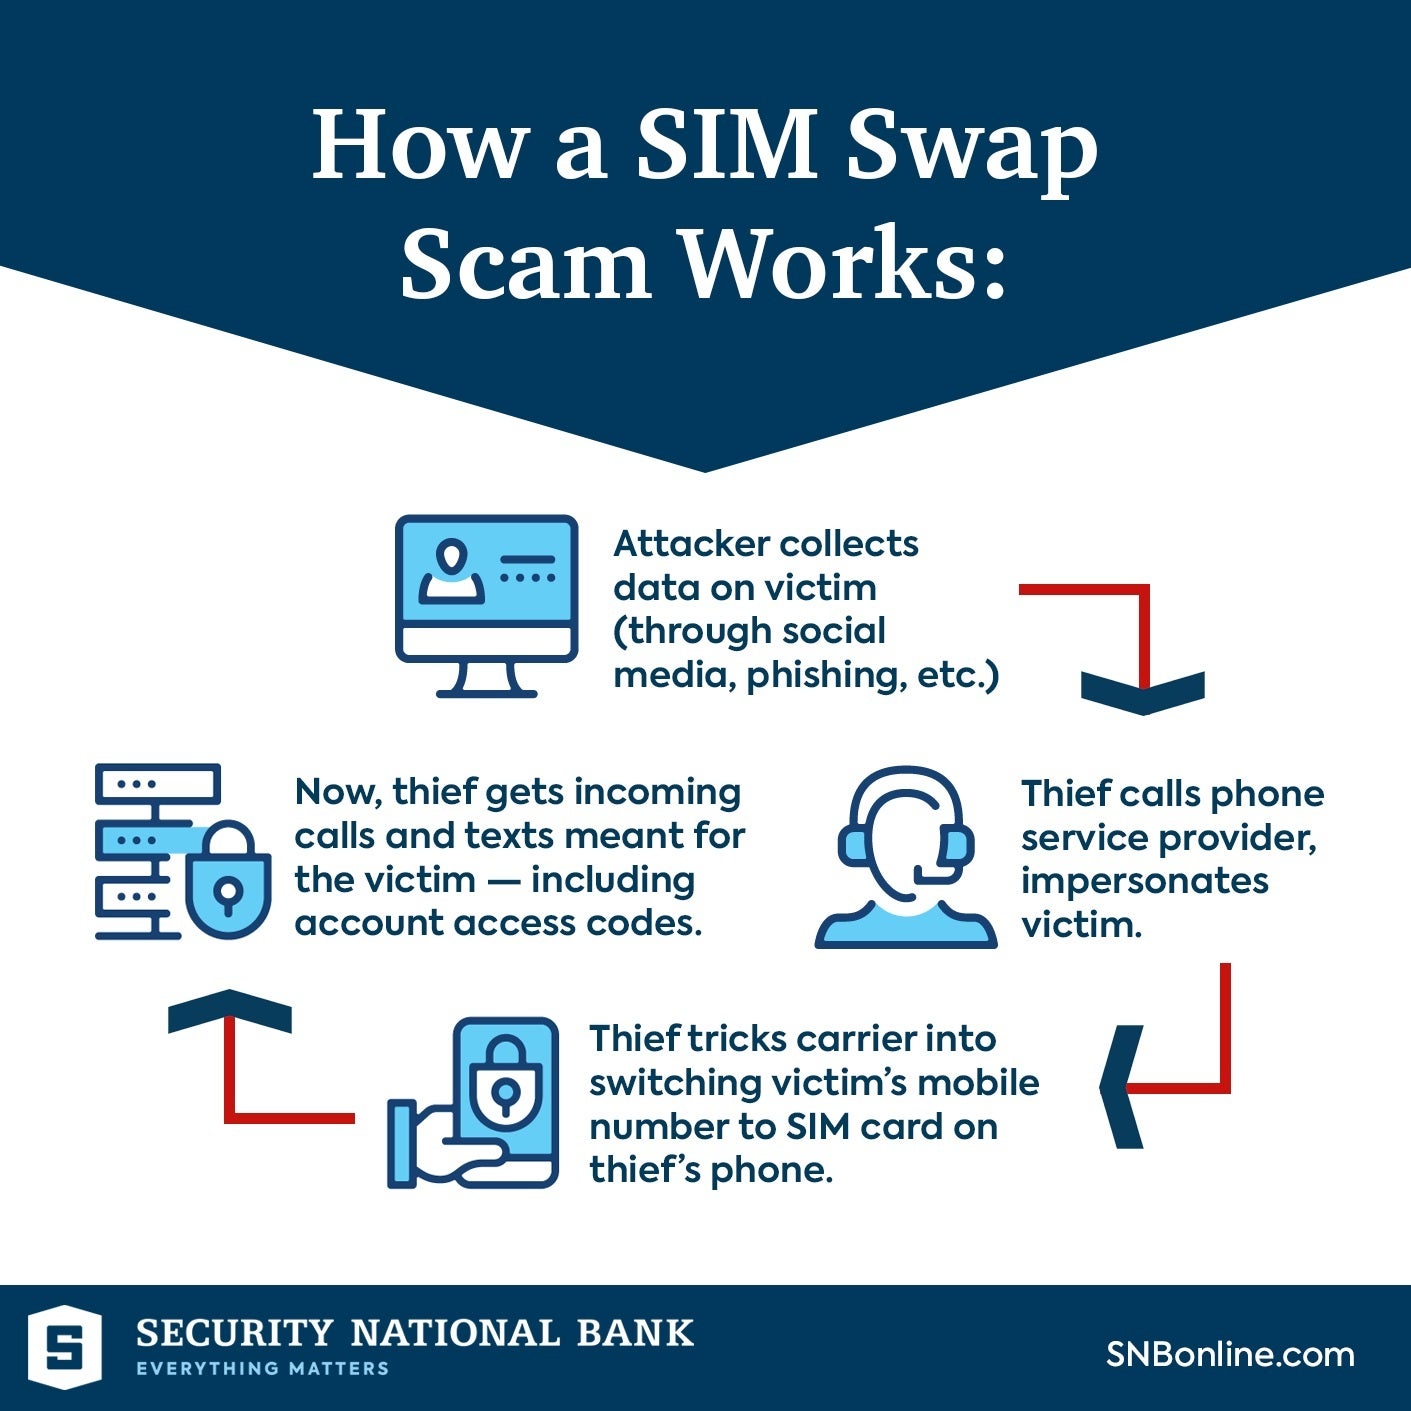 How a SIM Swap works - Criminals take over family's Cricket account and drain their bank and investment apps